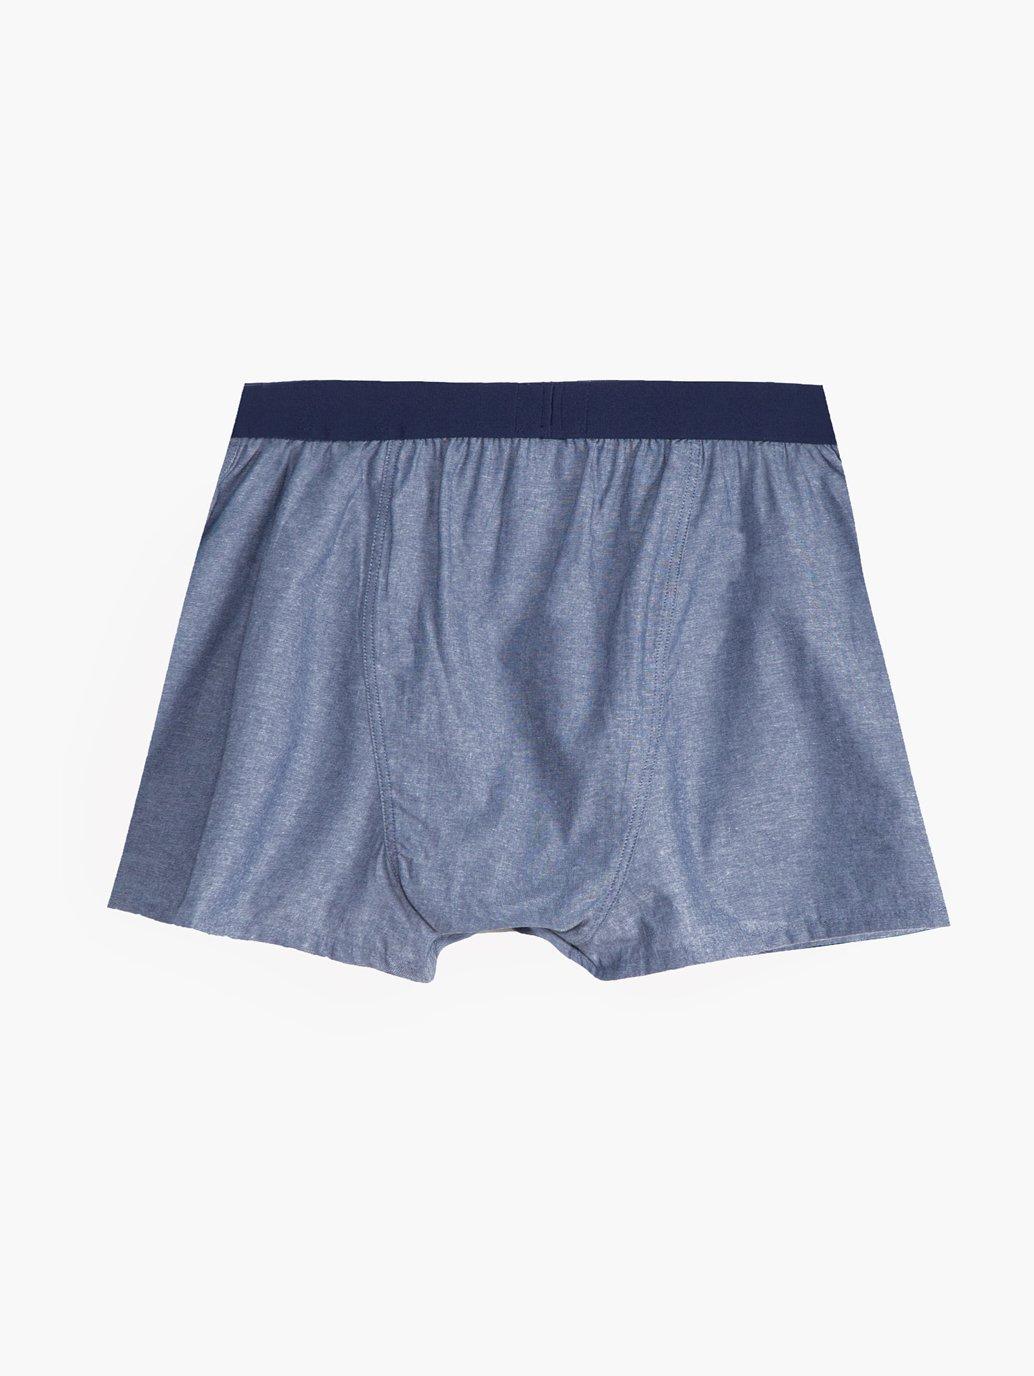 levis malaysia mens chambray boxers  876200020 02 Back